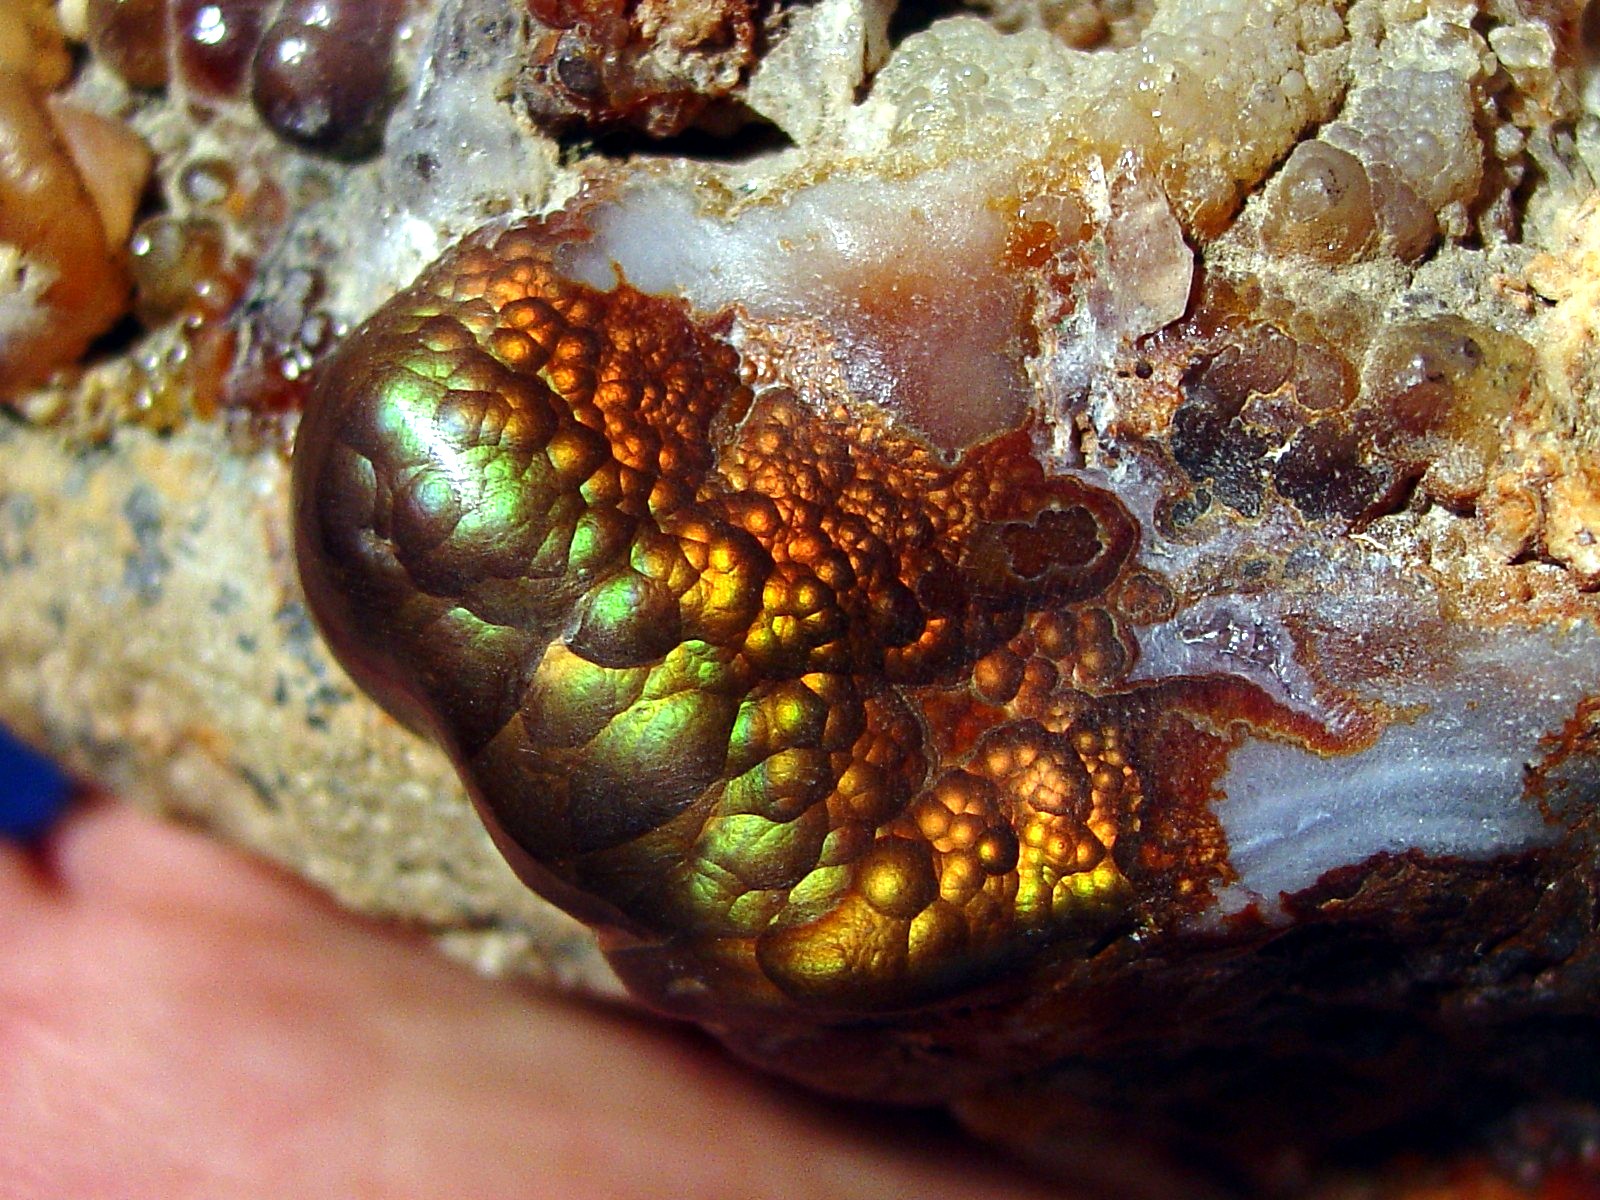 Photo Arizona Fire Agate gemstone mineral specimen was recently purchased out of the Gietz Fire Agate Collection in Safford, Arizona. Mr. Gietz, a now retired gem dealer who was raised in Safford, was in the Arizona gemstone business for many years.